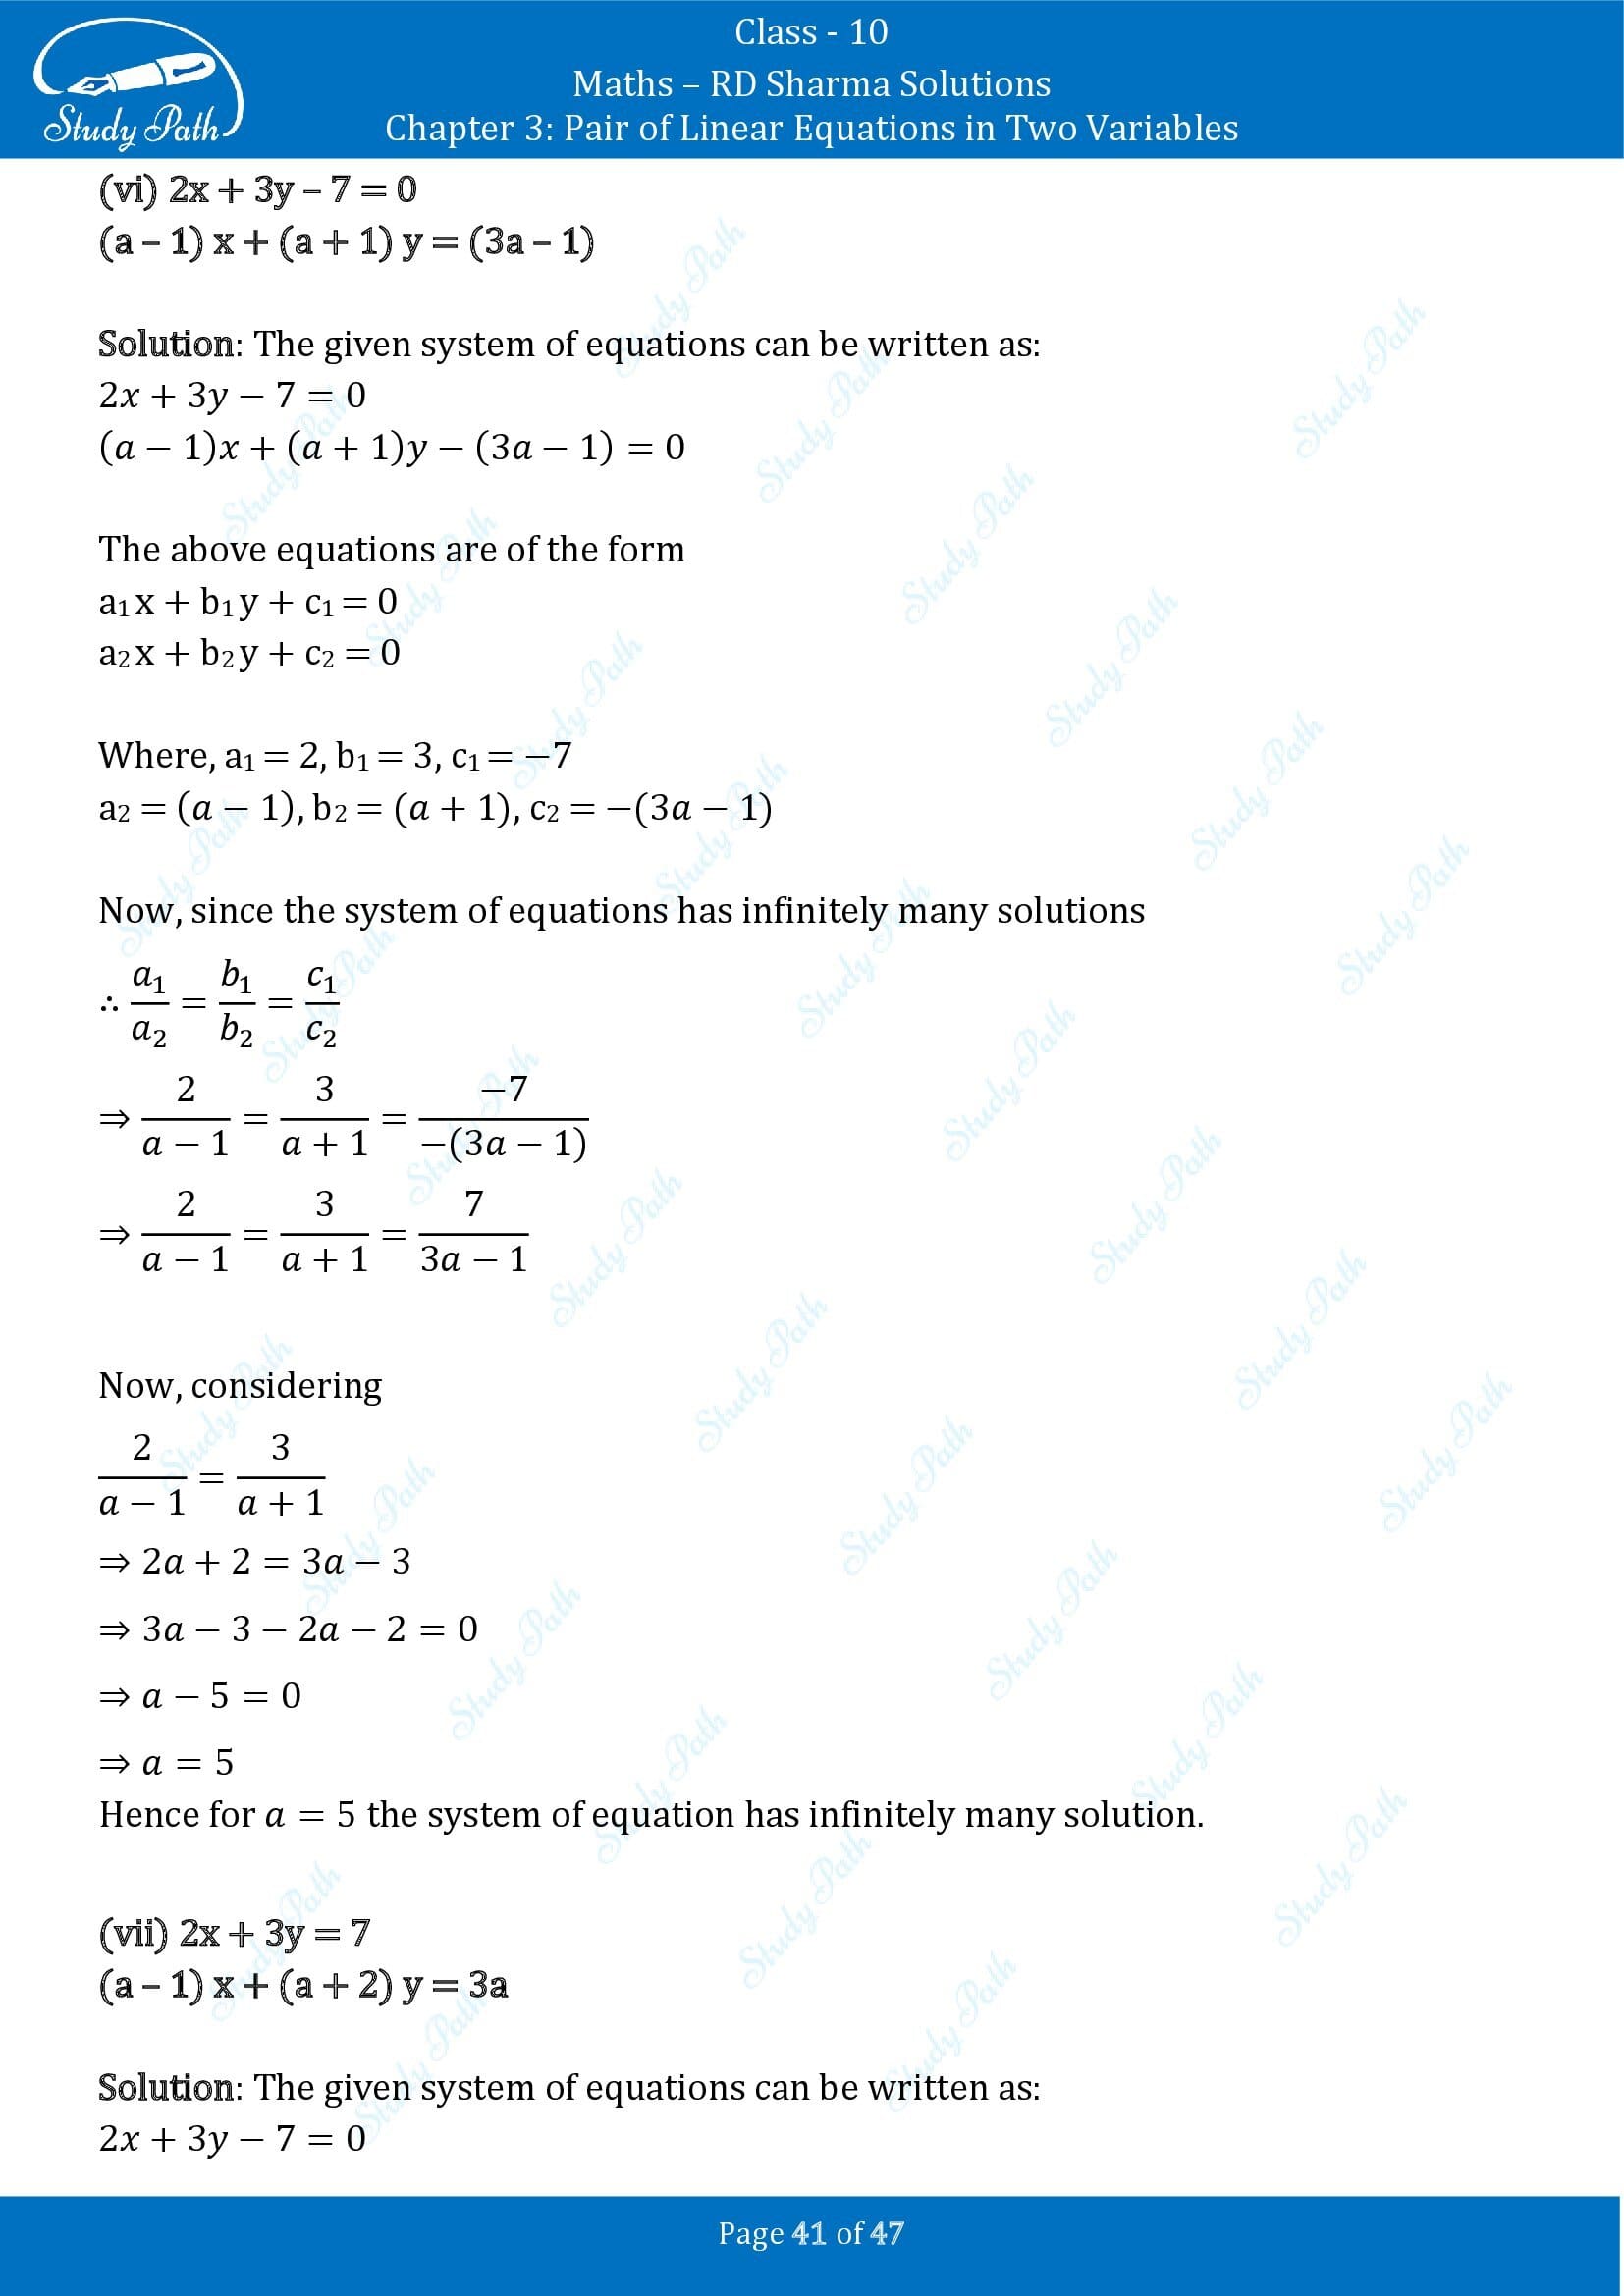 RD Sharma Solutions Class 10 Chapter 3 Pair of Linear Equations in Two Variables Exercise 3.5 00041